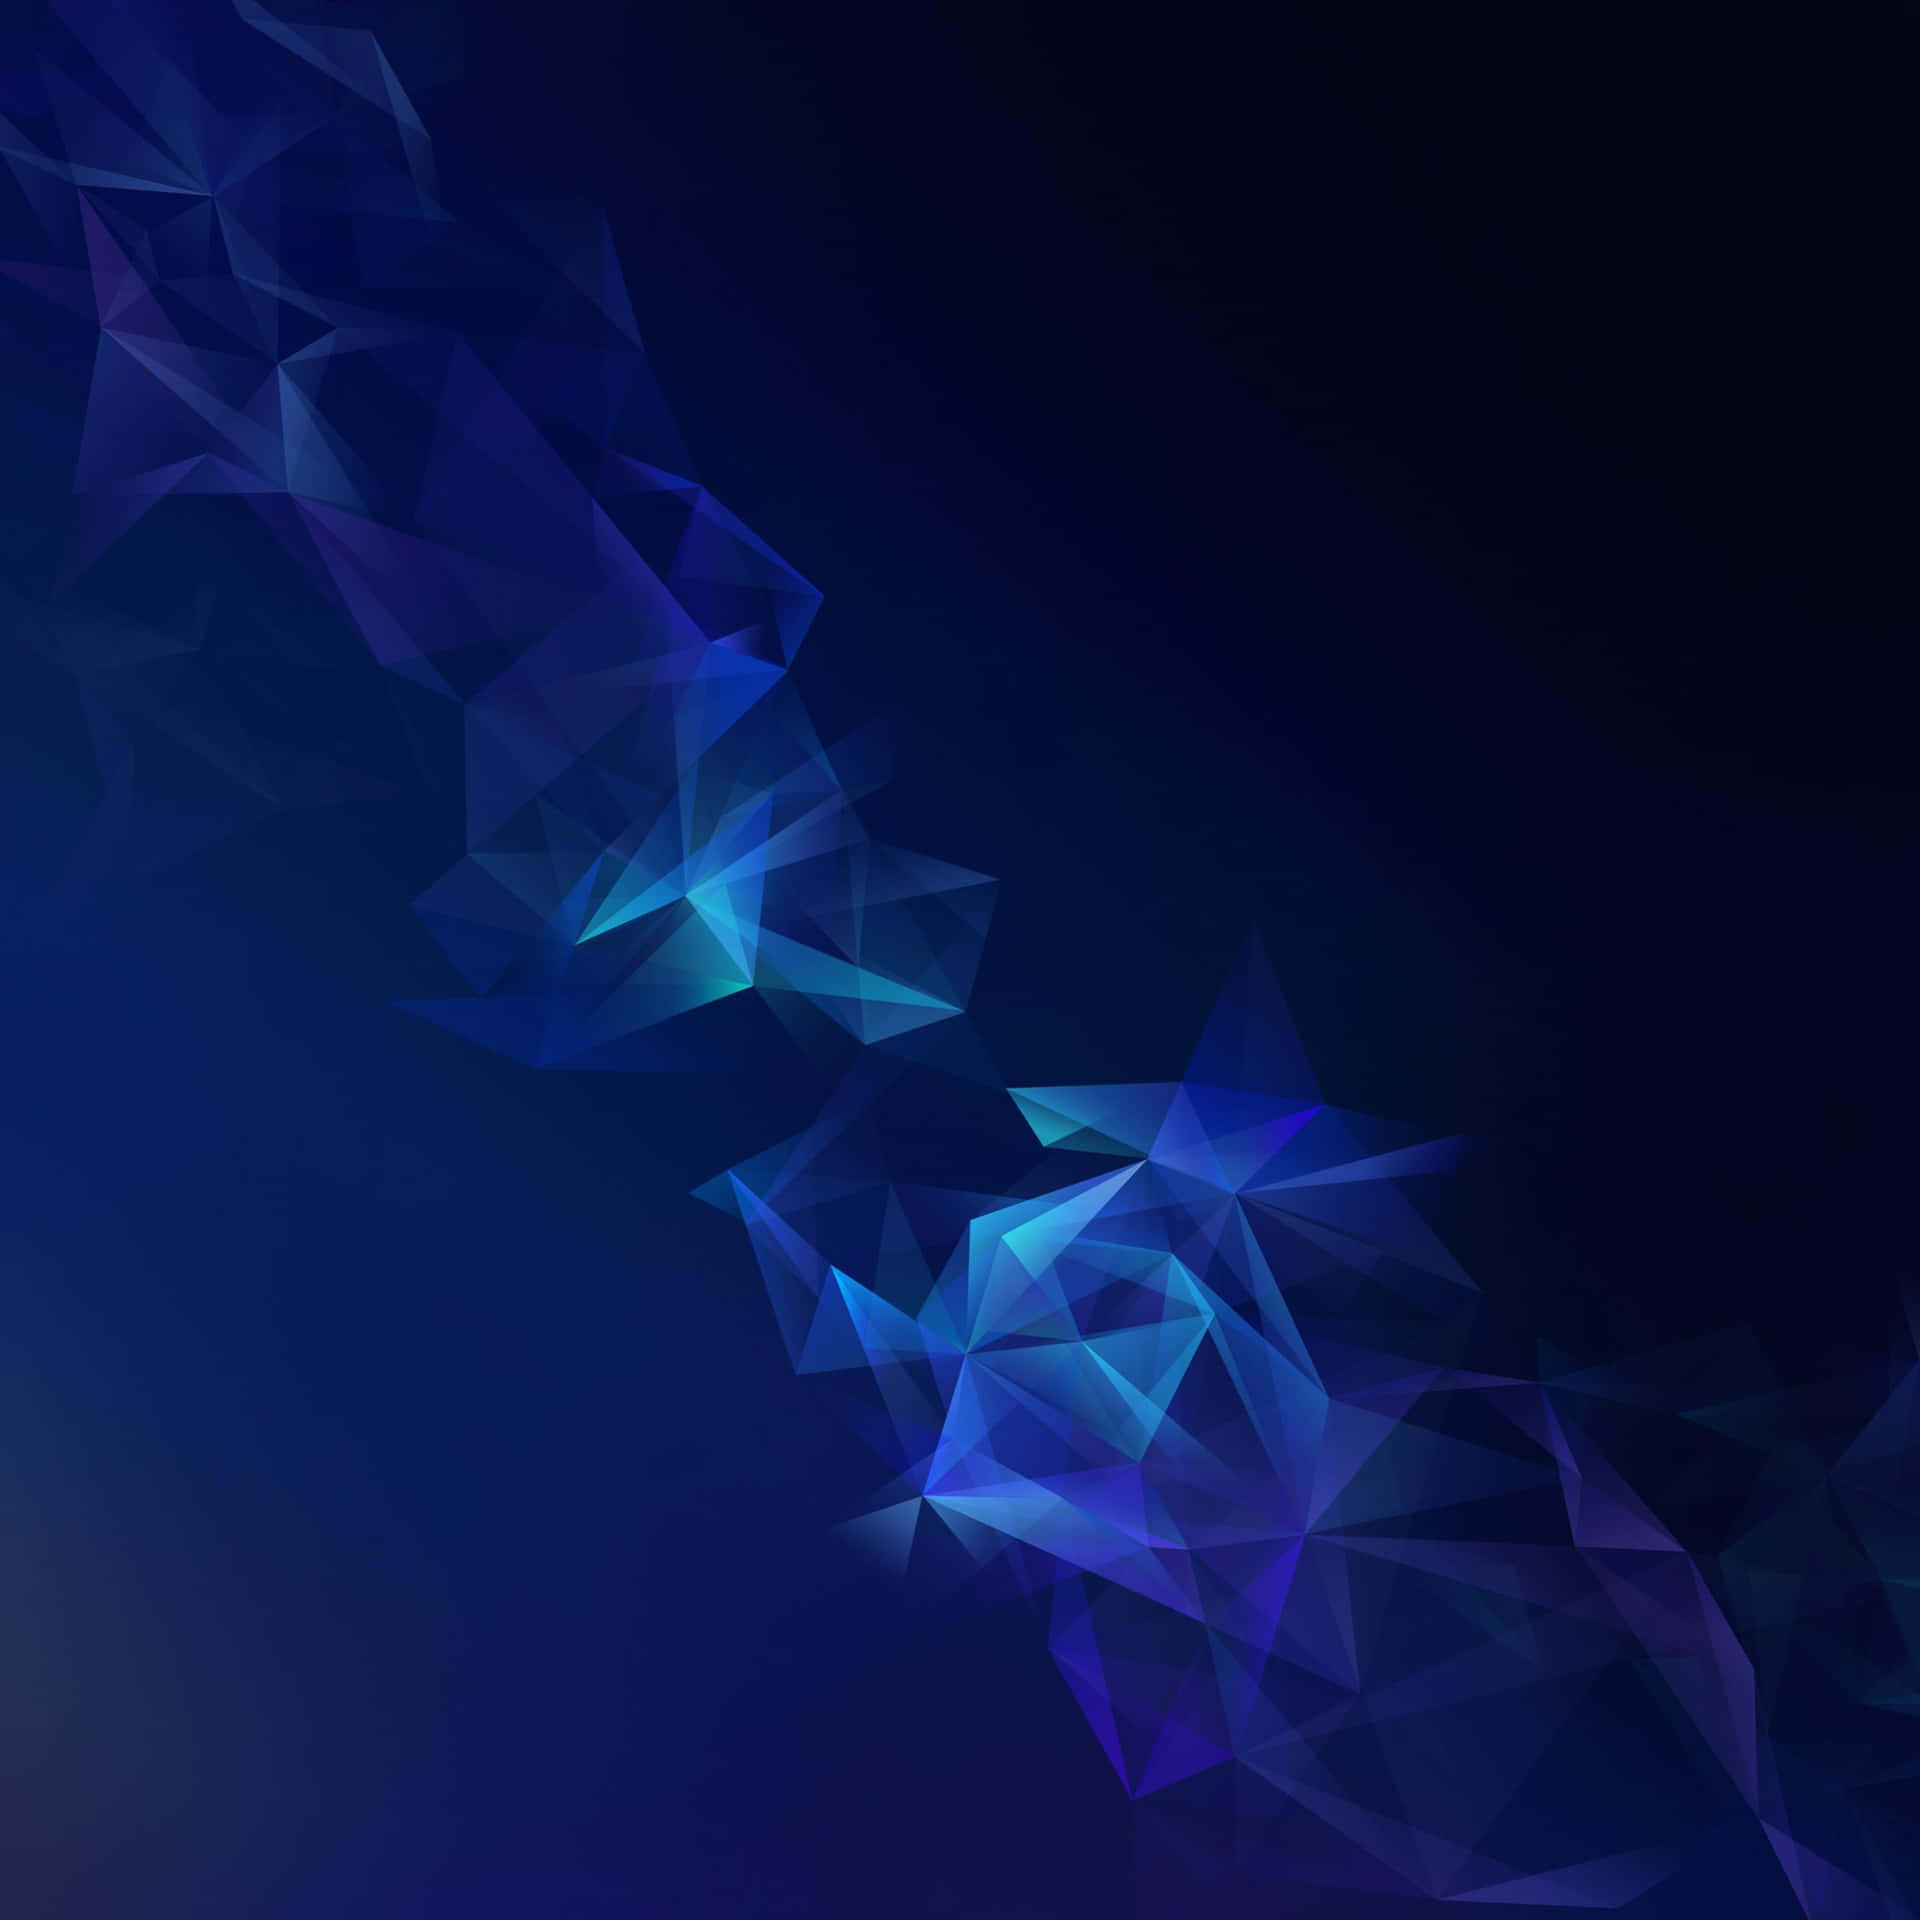 Samsung Dex With Blue Geometric Shapes Wallpaper